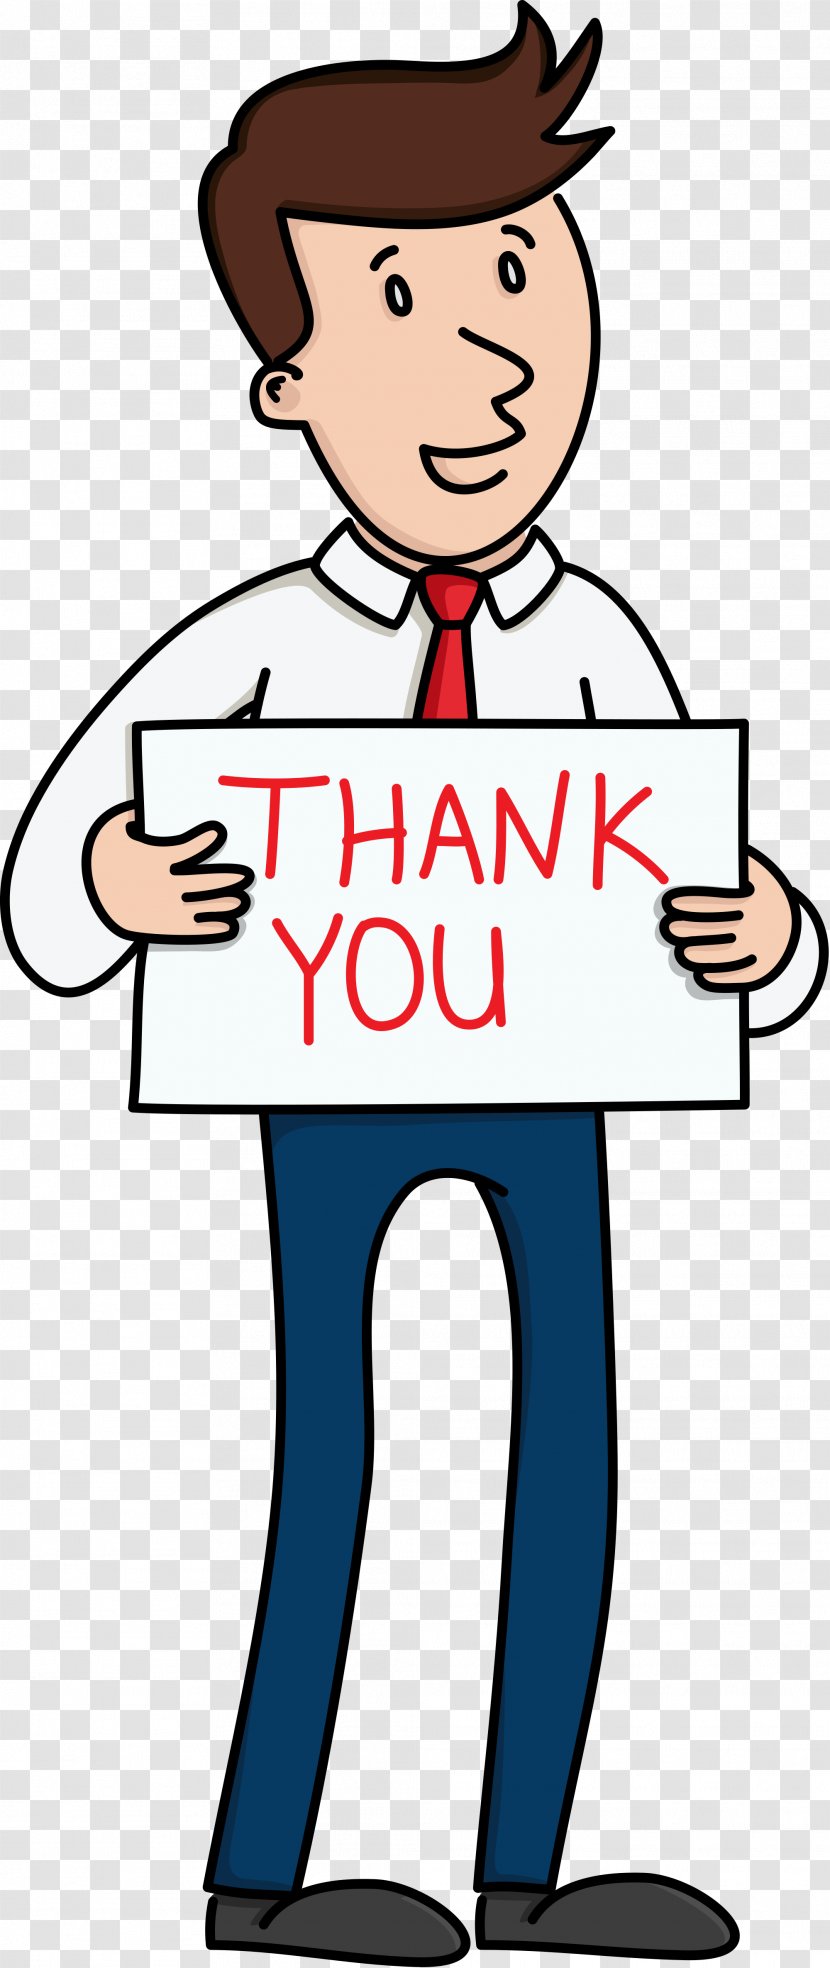 Vector Graphics Illustration Image Cartoon - Animation - Thank You Transparent PNG